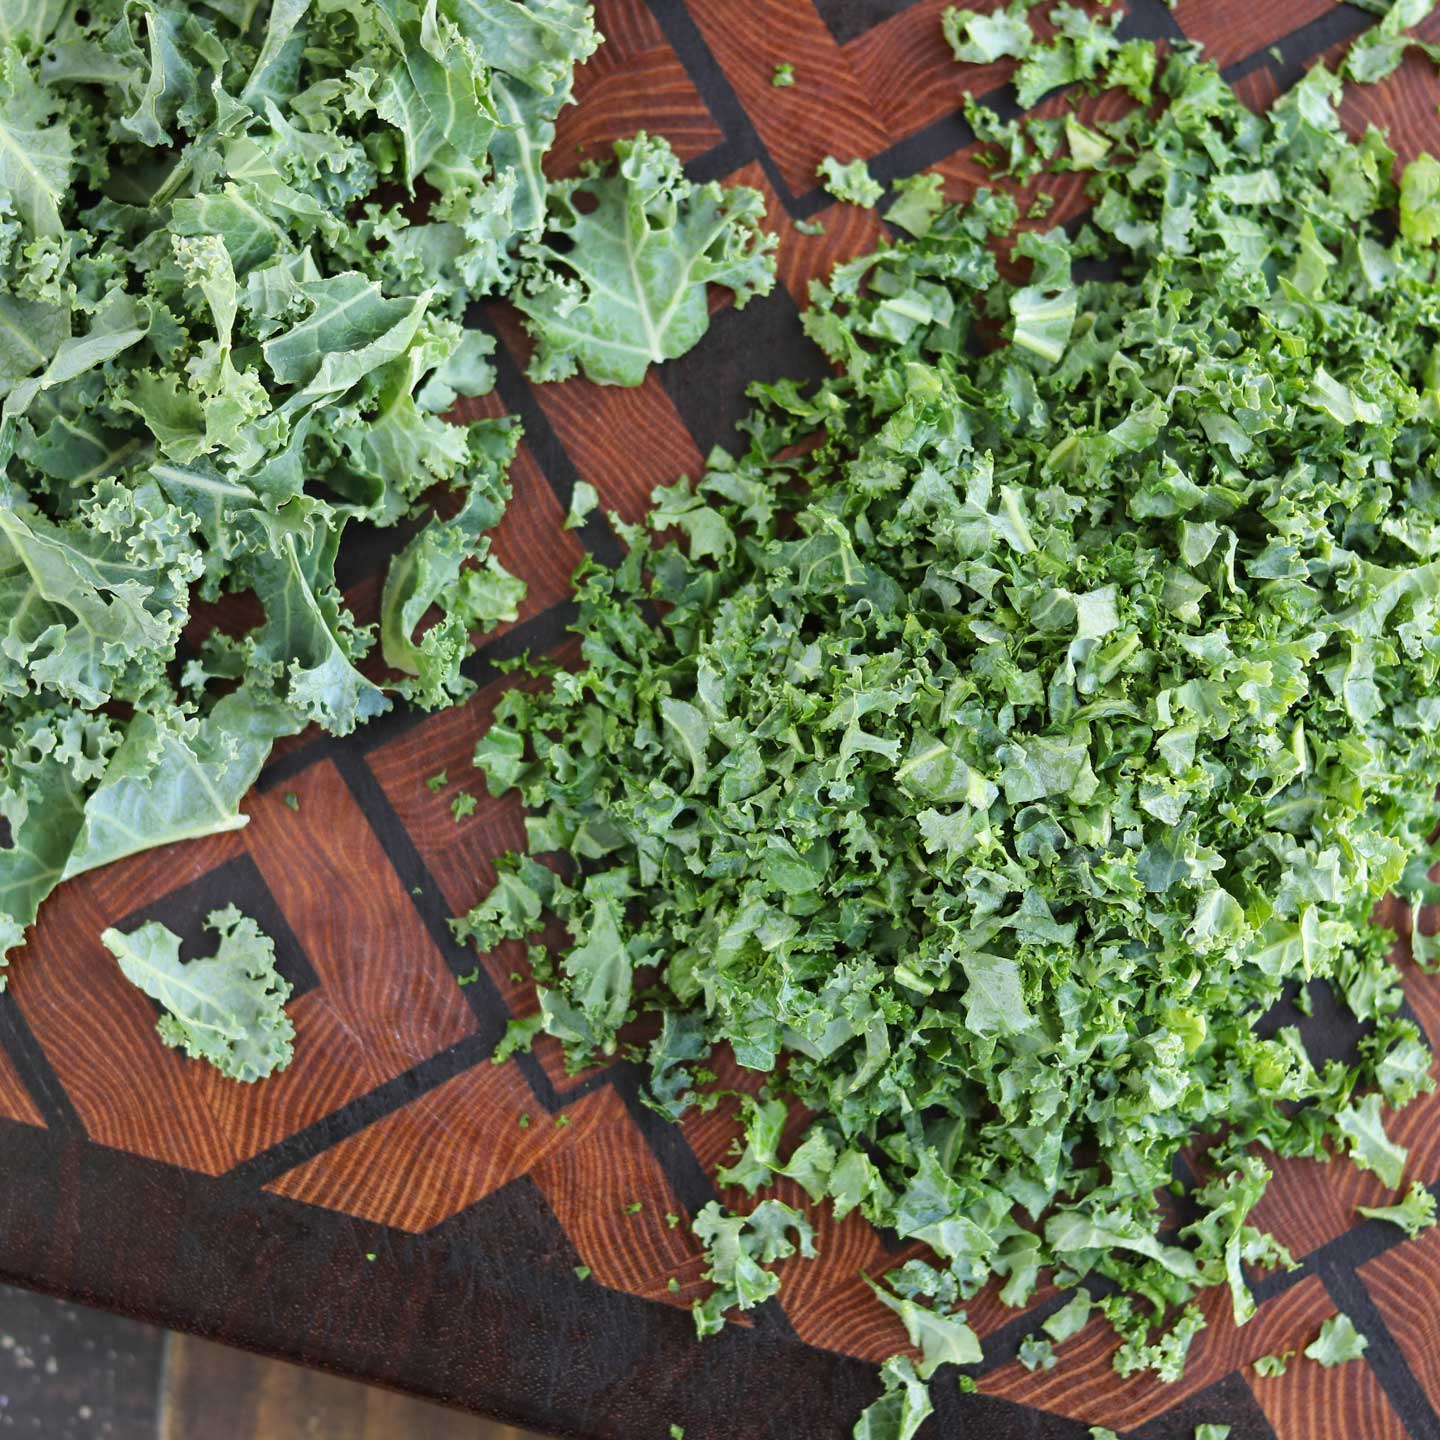 Whether or not you have to spend time as a kale masseuse may simply depend on how finely you chop your kale leaves before adding them to your salad!